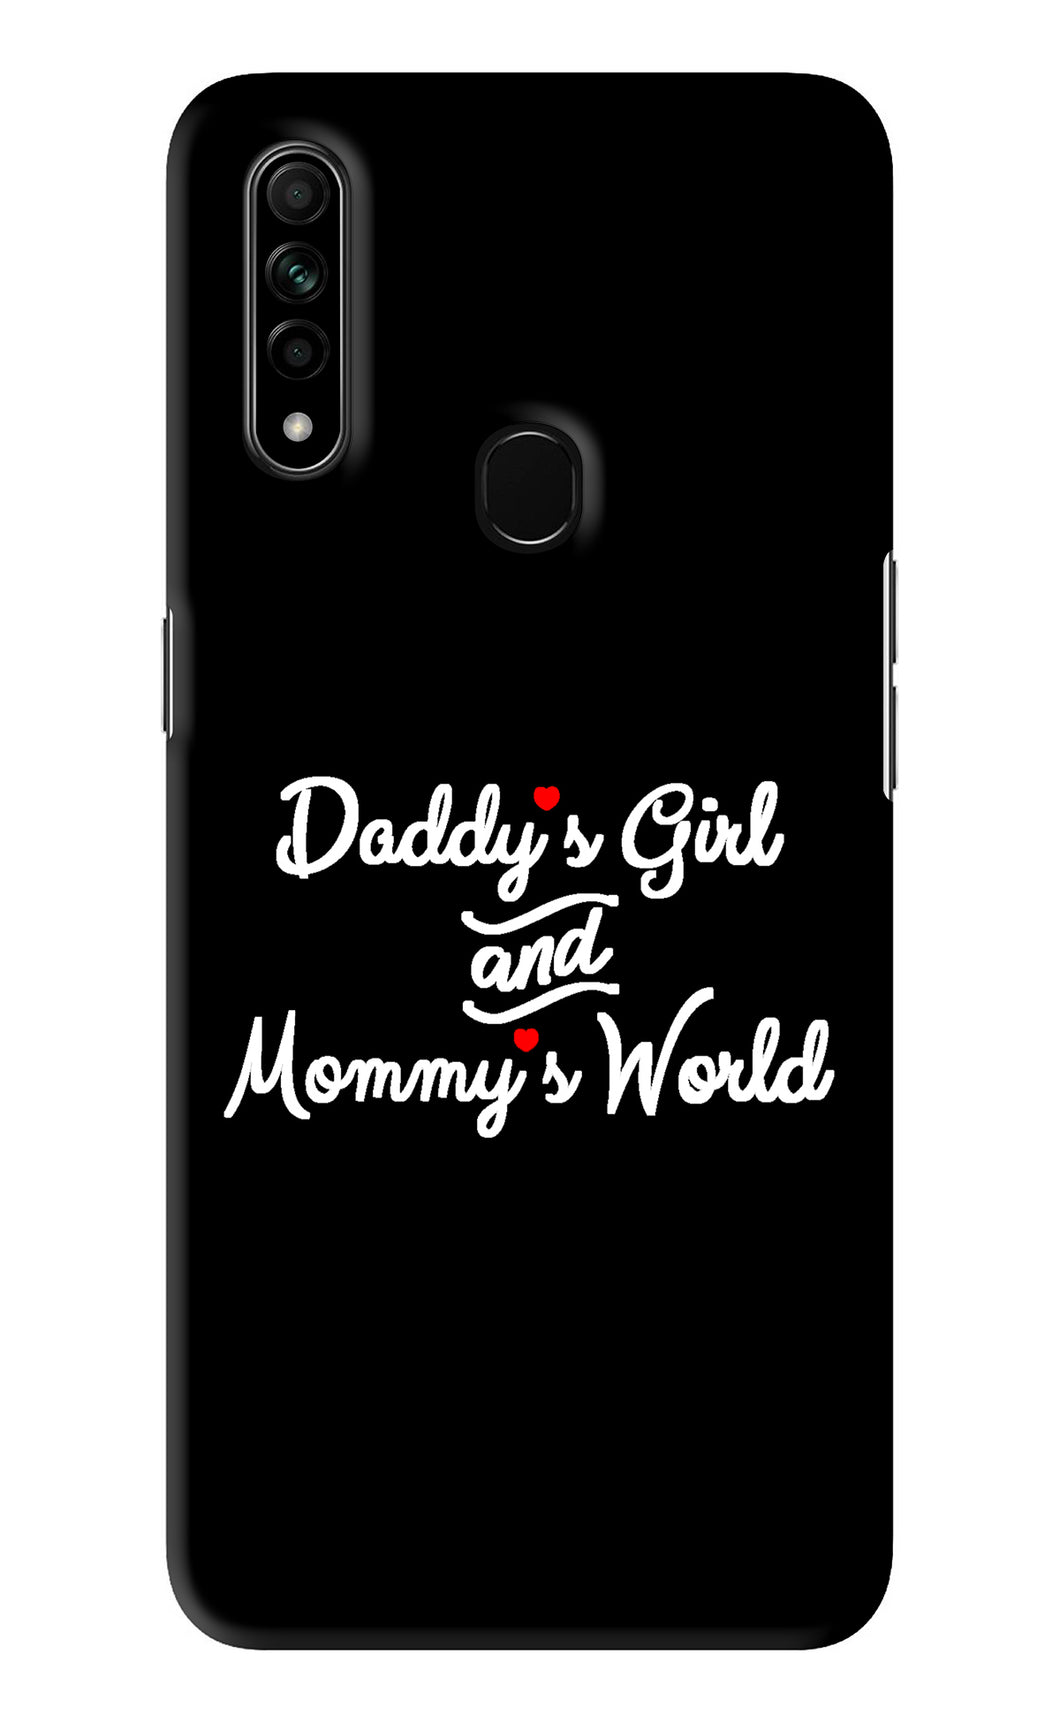 Daddy's Girl and Mommy's World Oppo A31 Back Skin Wrap